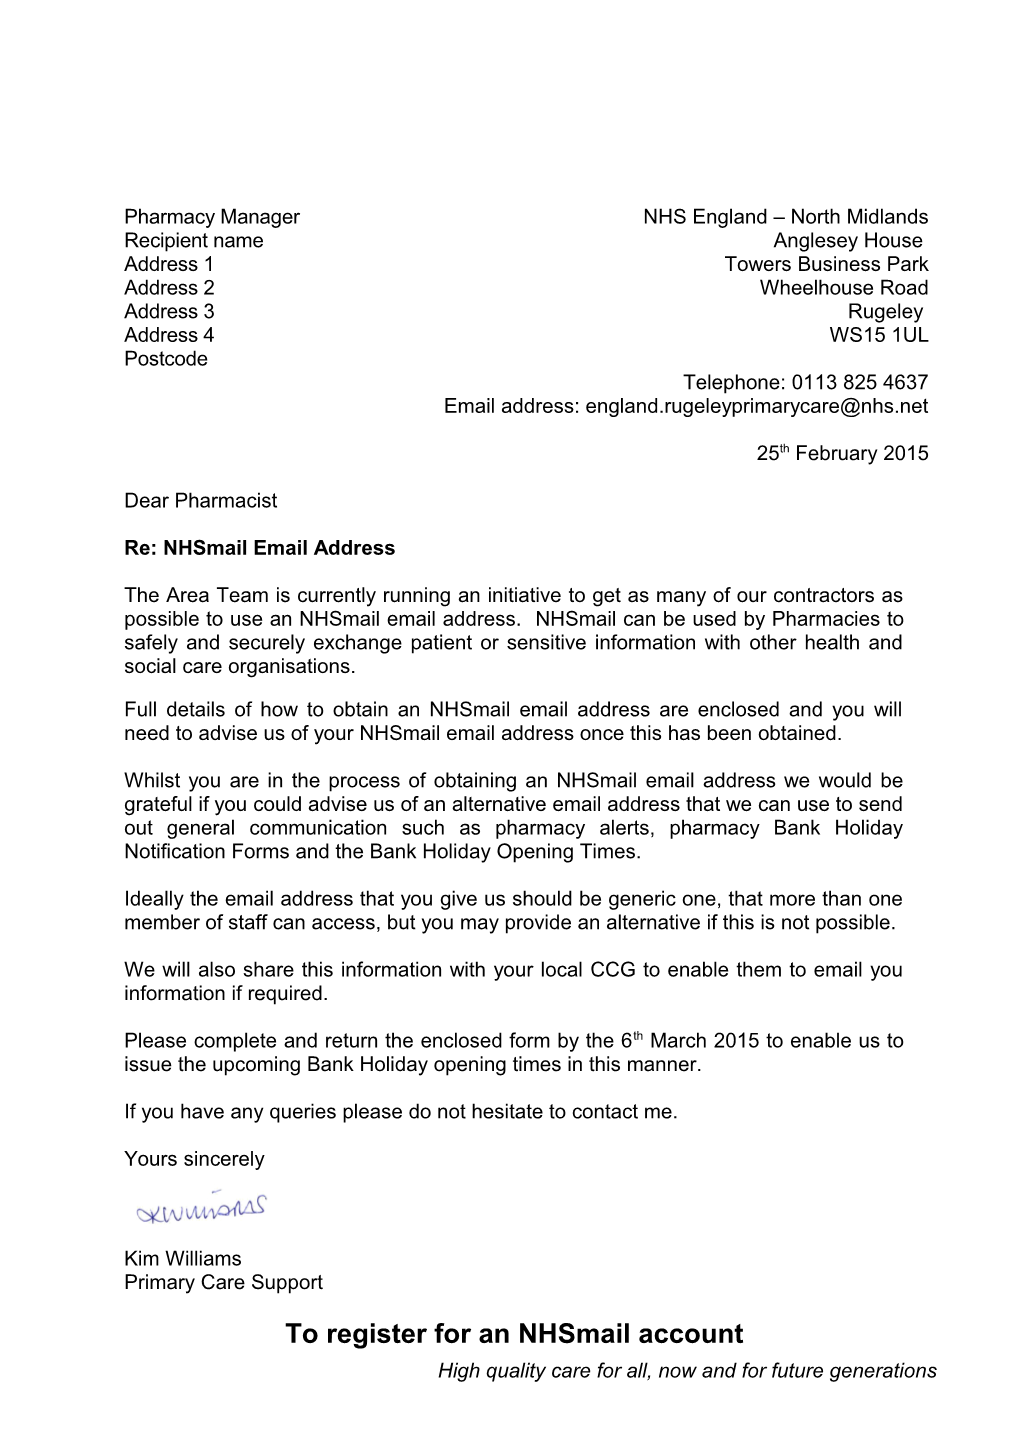 NHS England Letter Template